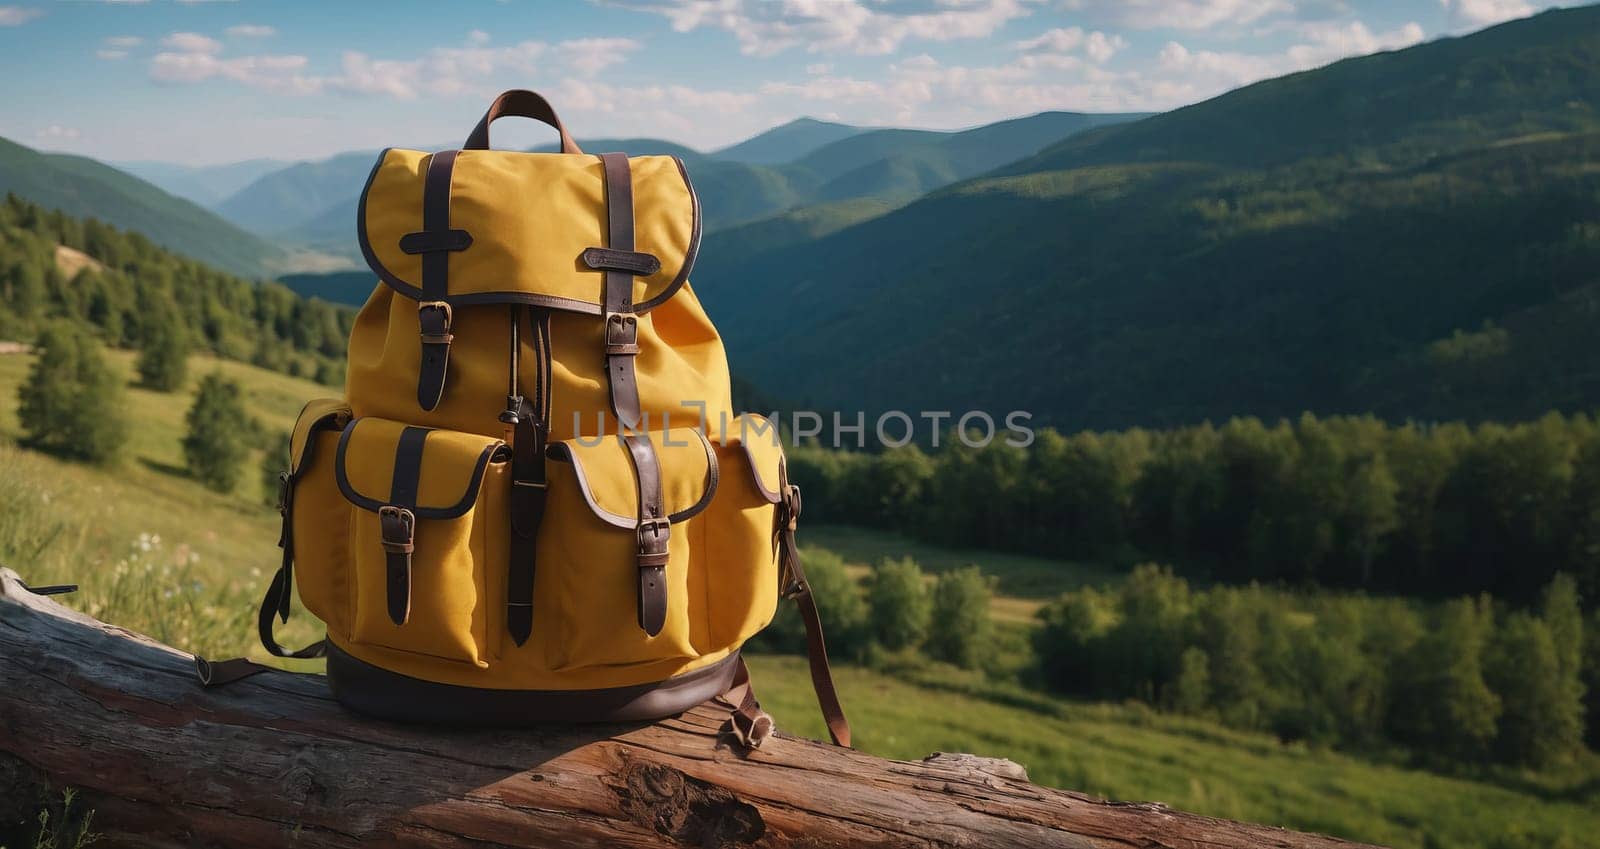 Yellow backpack on a log with a stunning mountain view in the background, symbolizing adventure and travel